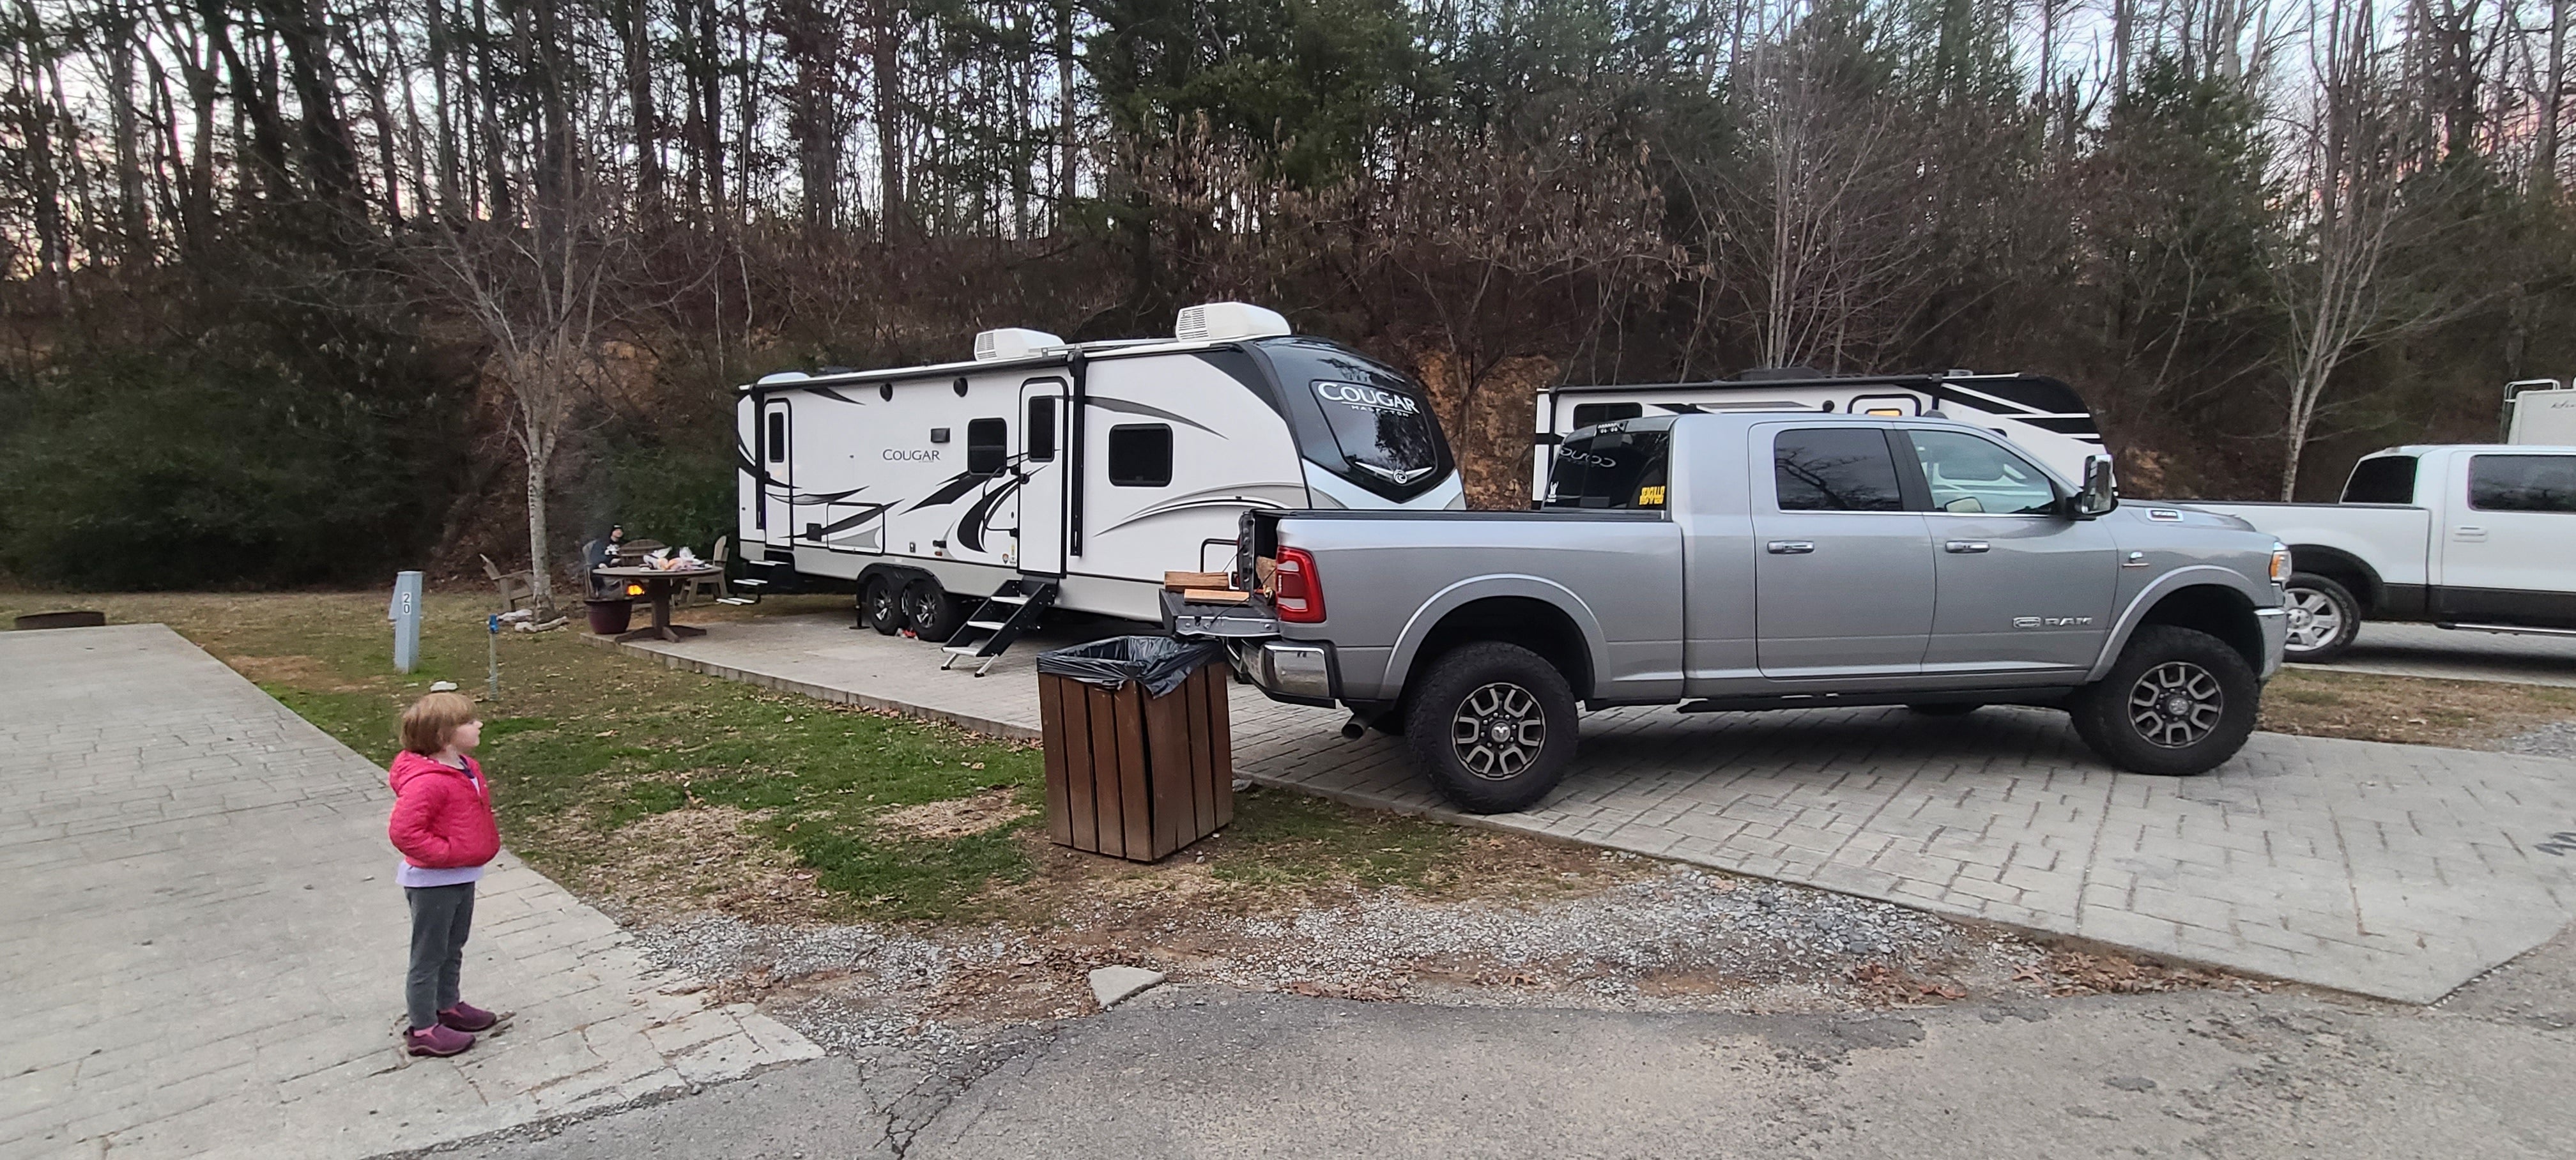 Camper submitted image from Jellystone Park Camp Resort in Pigeon Forge/Gatlinburg - 2